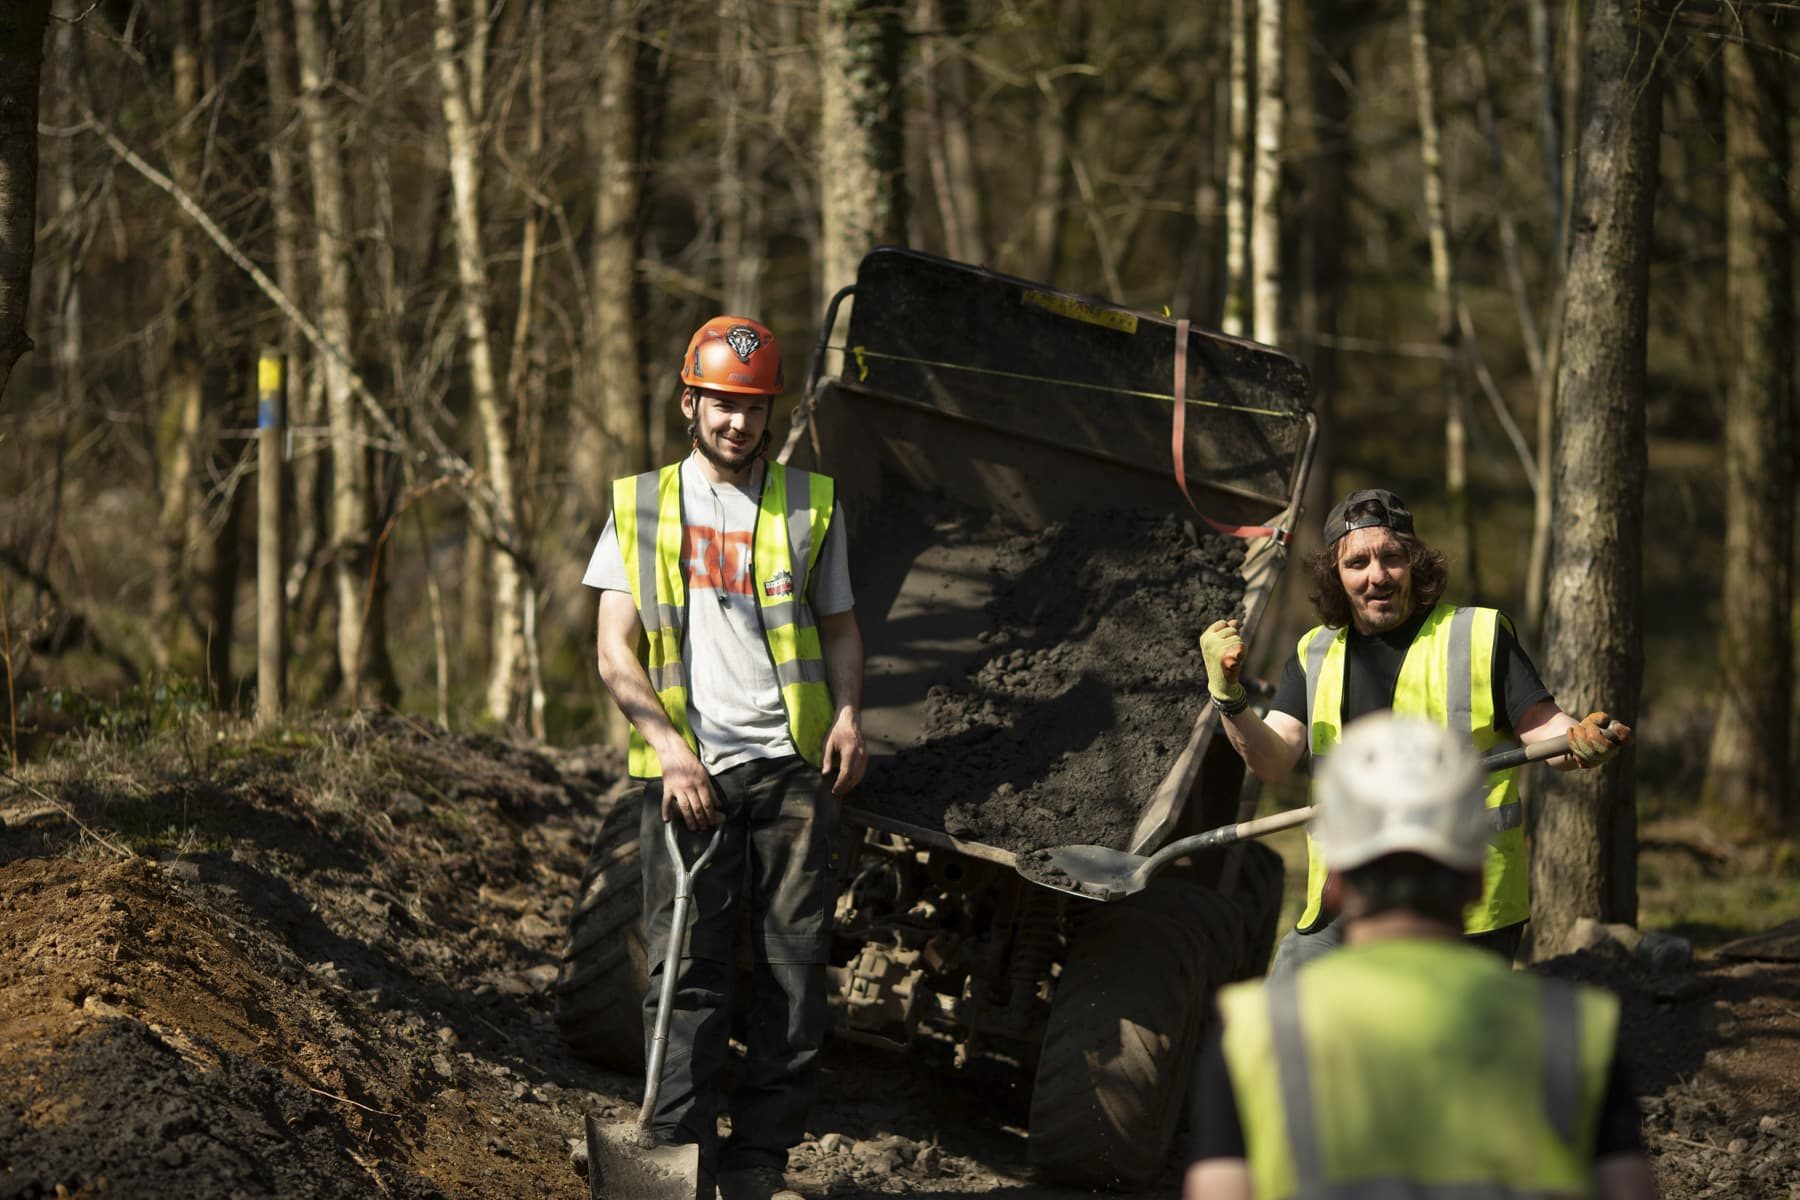 there’s a lot more to running BikePark Wales than just keeping the trails smooth and buses flowing, so we headed to the centre and took a look behind the scenes on a typical Friday just as spring started to show.